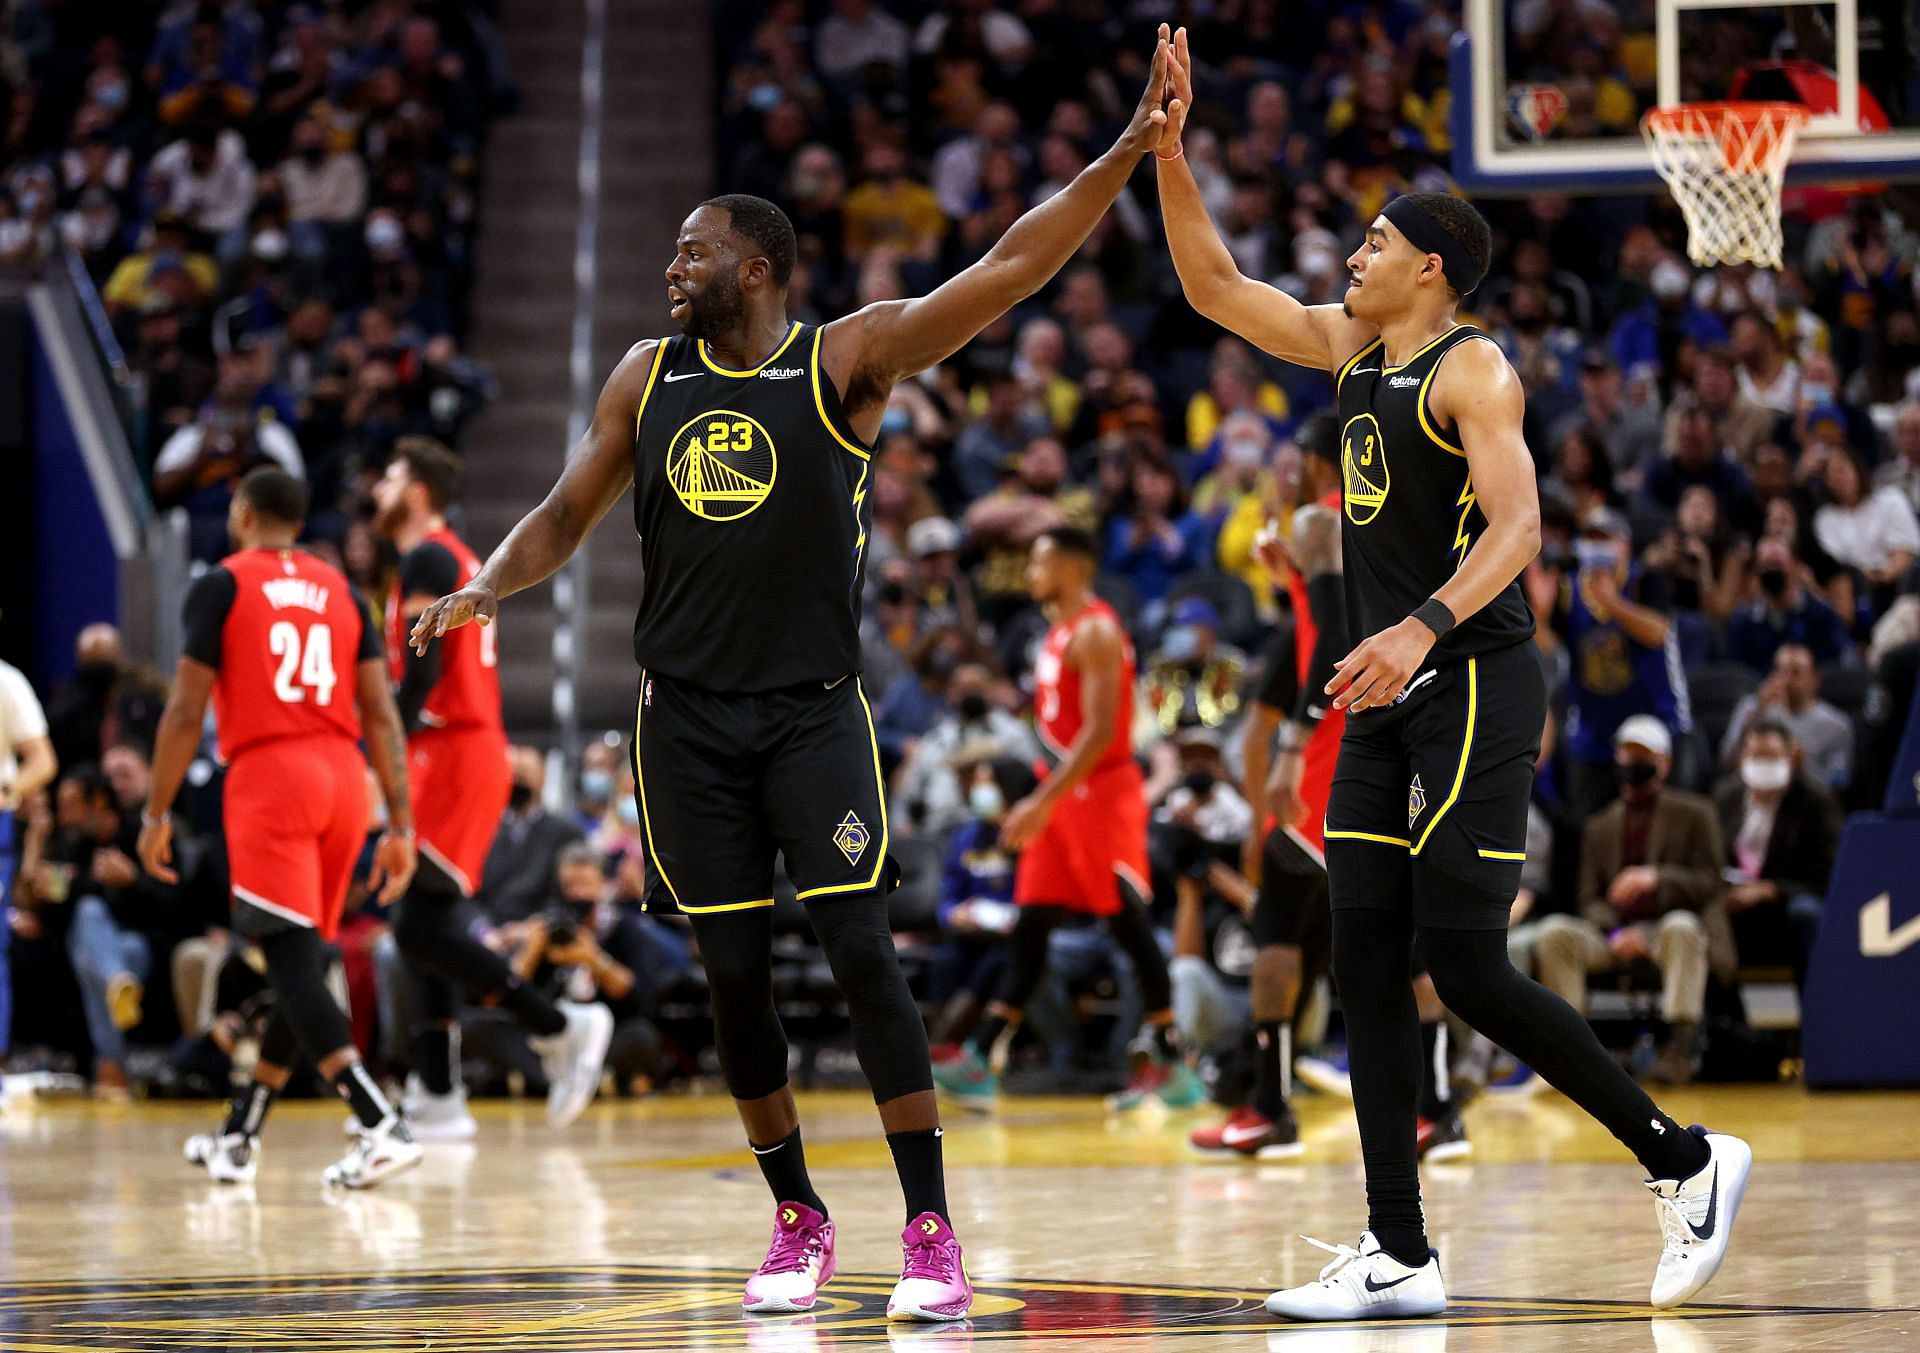 Draymond Green and Jordan Poole of the Golden State Warriors during the 2021-22 NBA season